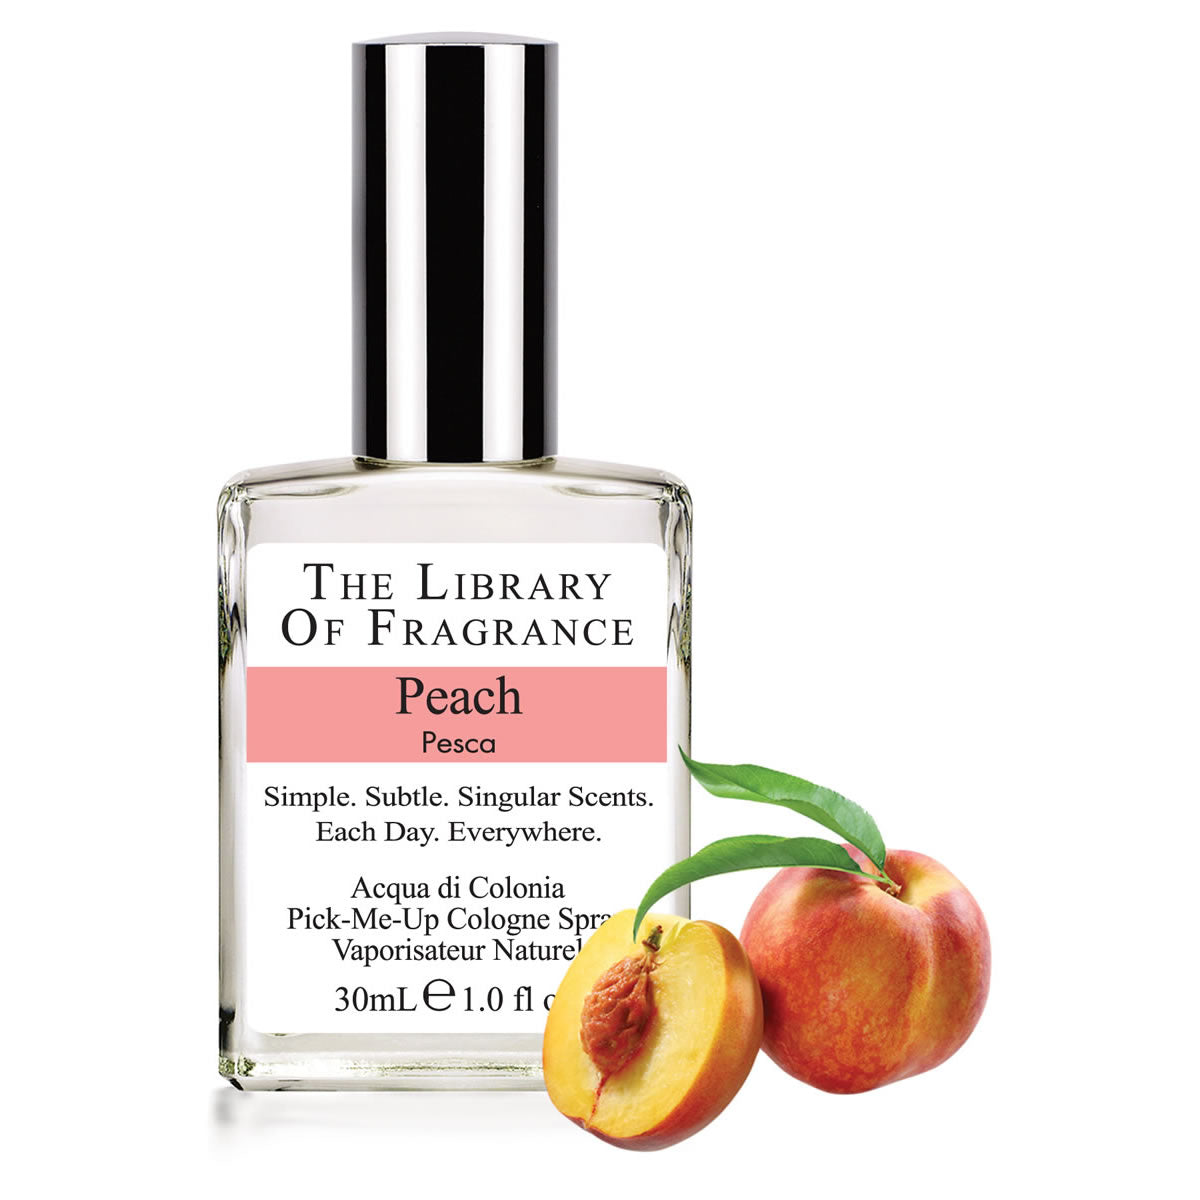 Profumo Peach The Library of Fragrance